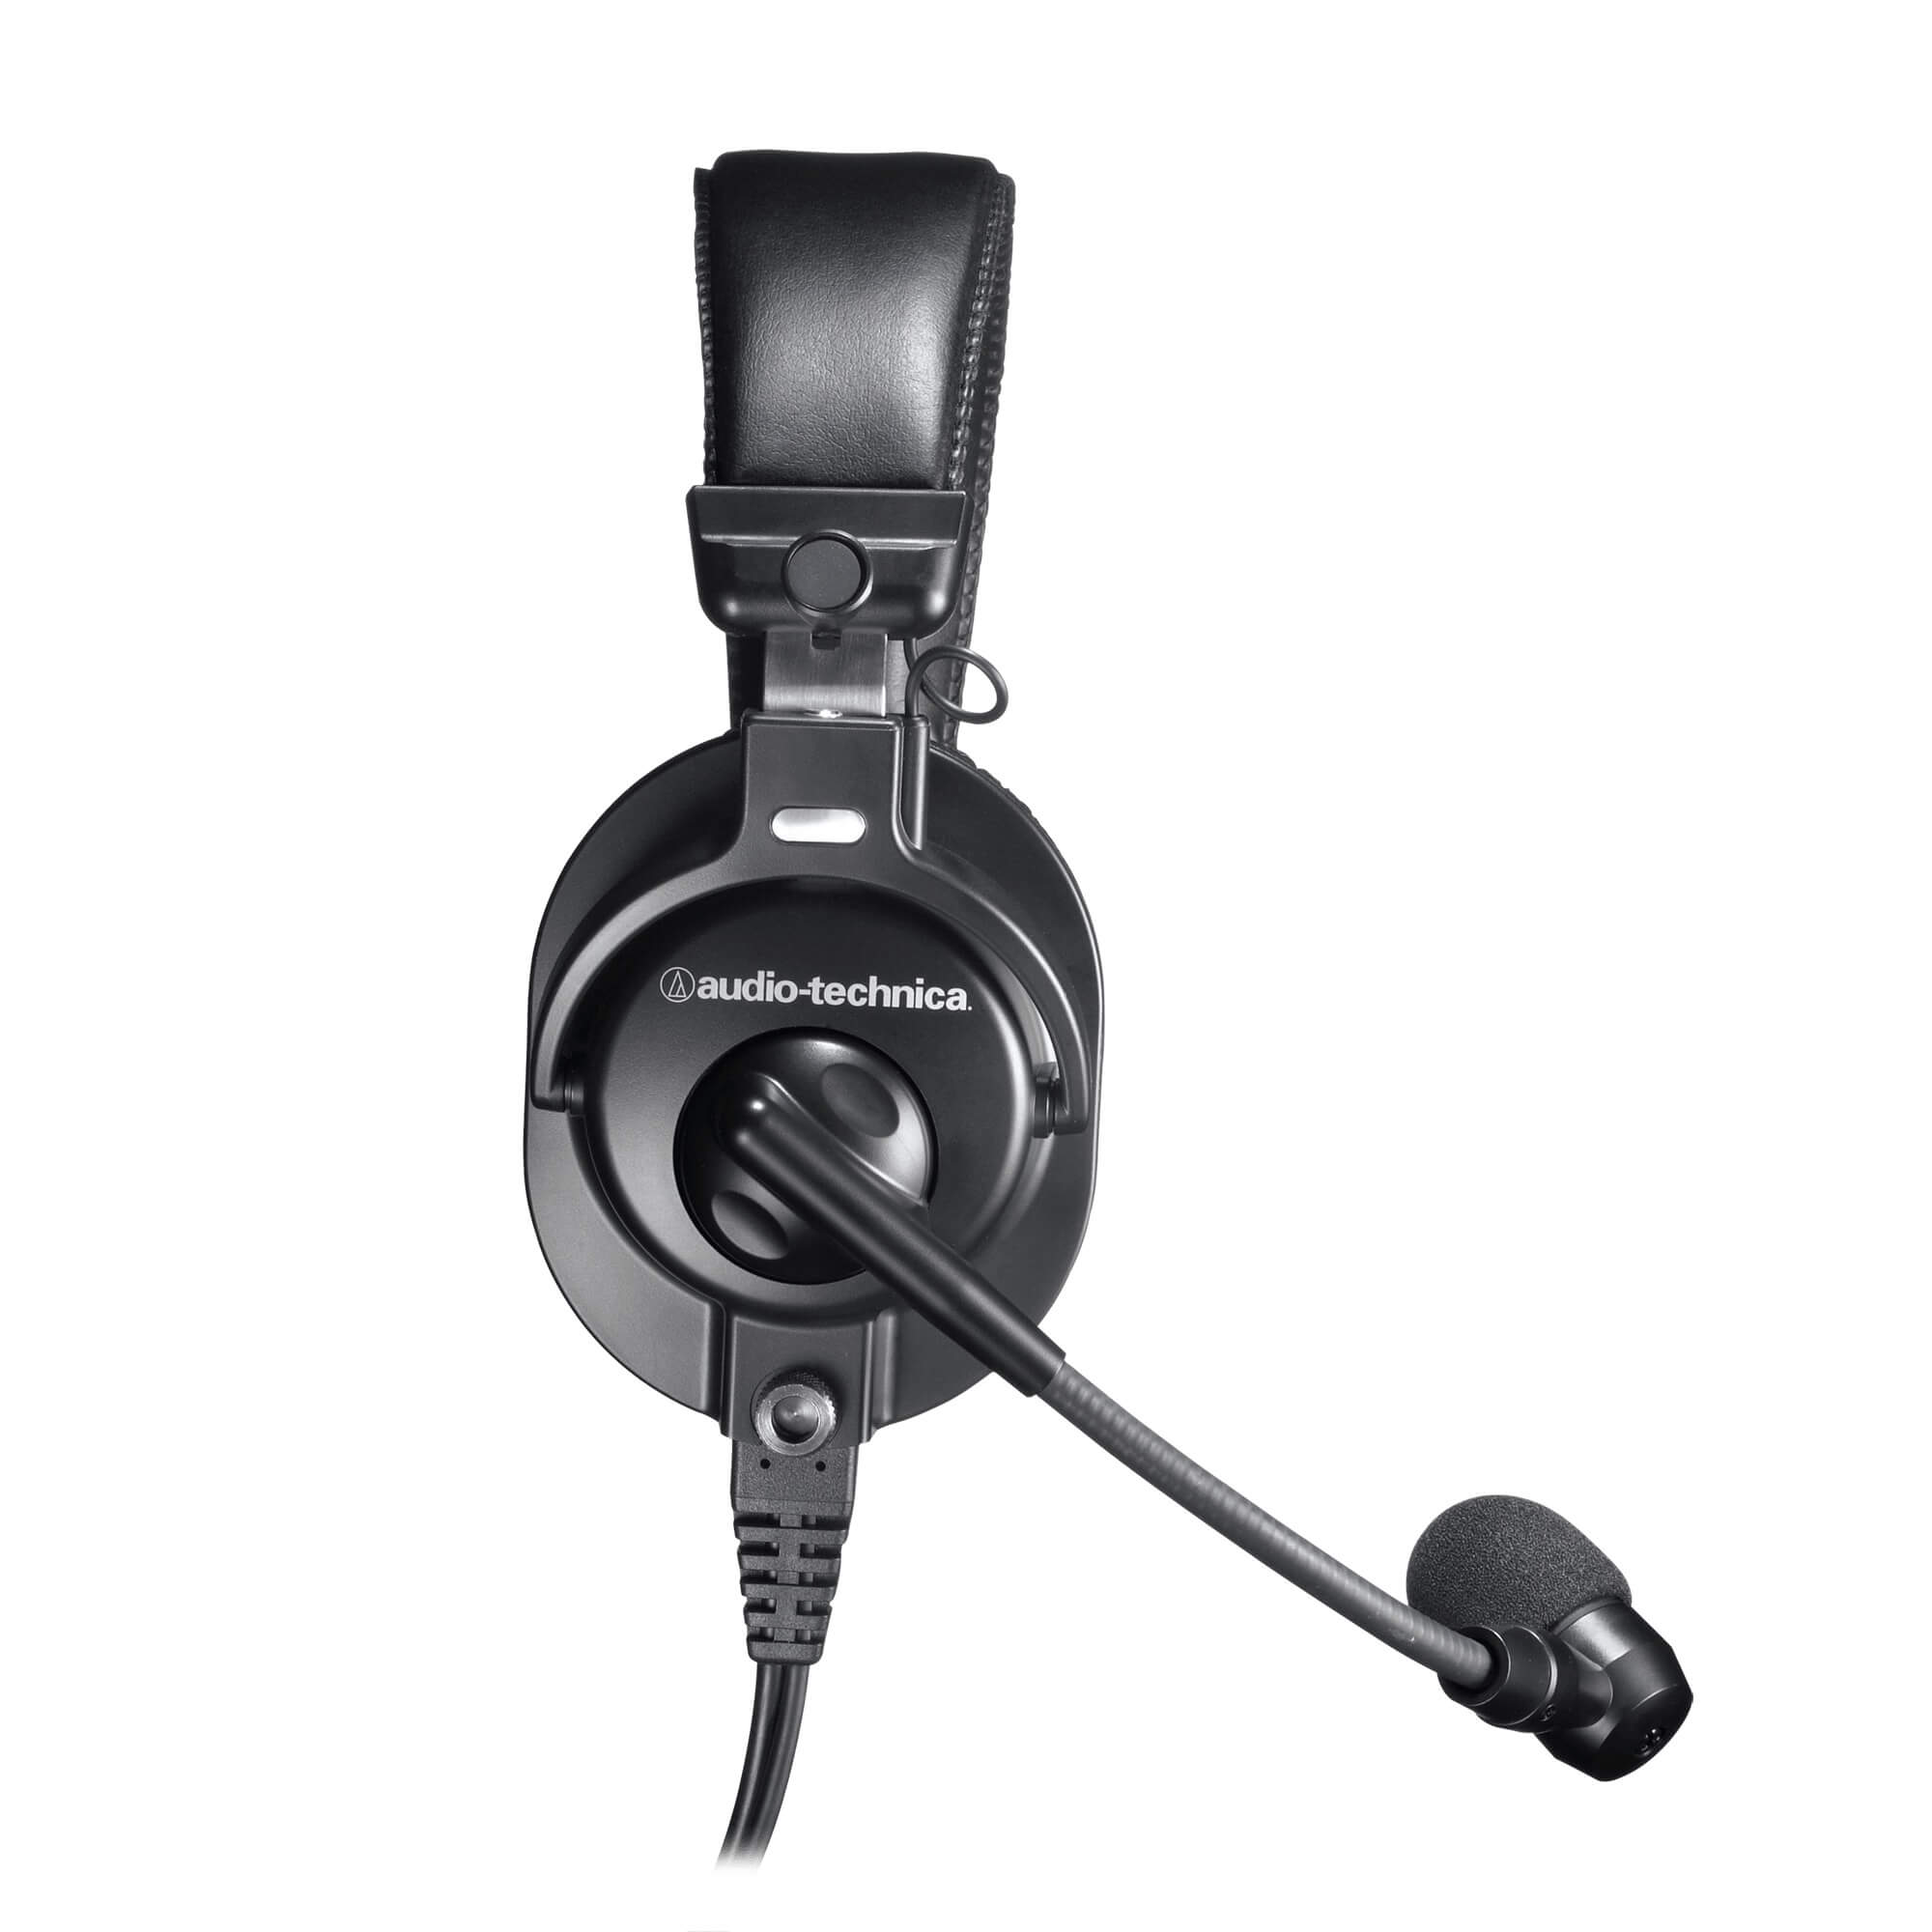 Audio-Technica BPHS1 - Broadcast Stereo Headset, side